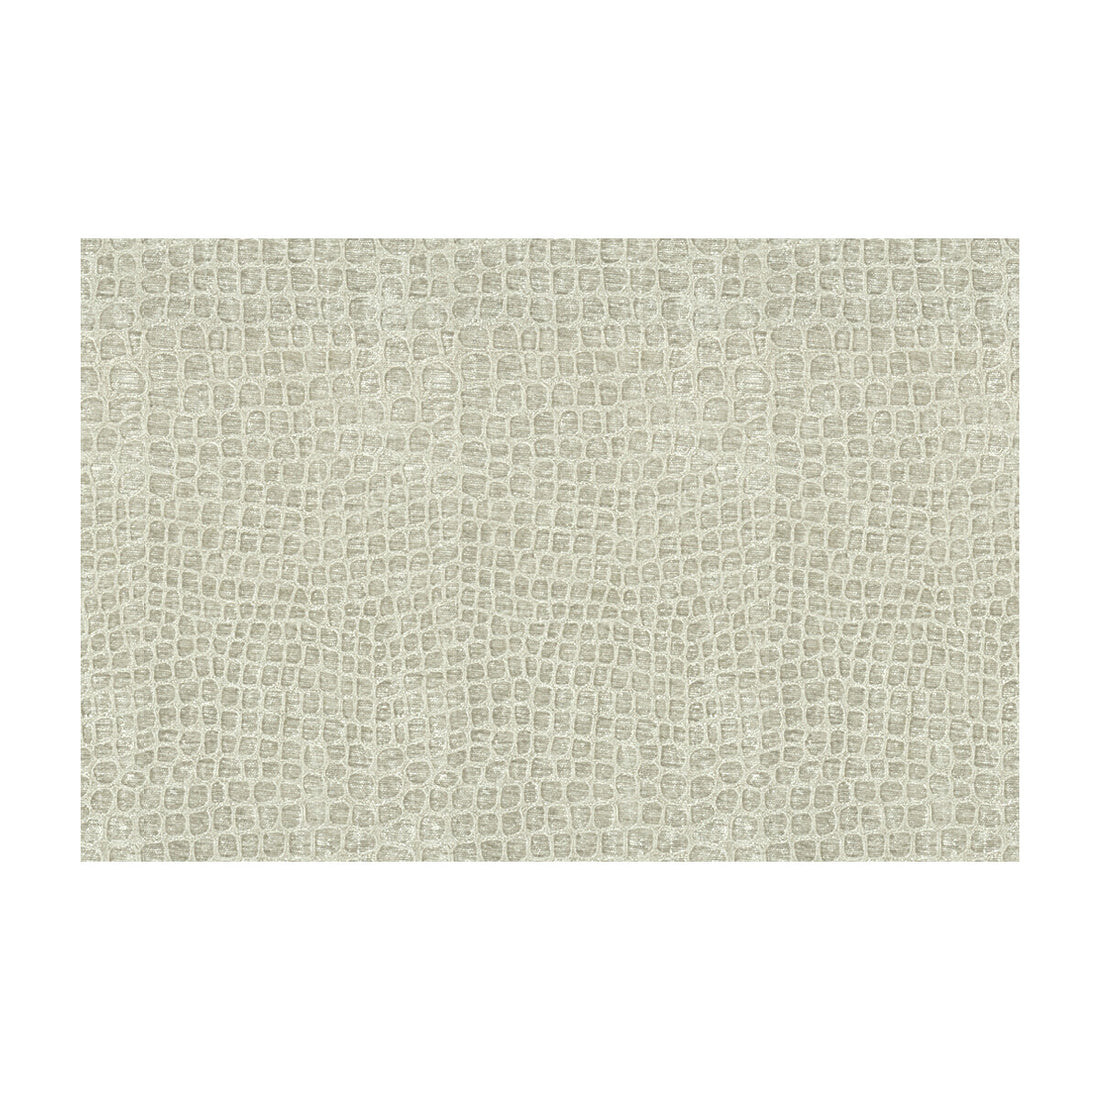 Finnian fabric in silver lining color - pattern 33107.11.0 - by Kravet Contract